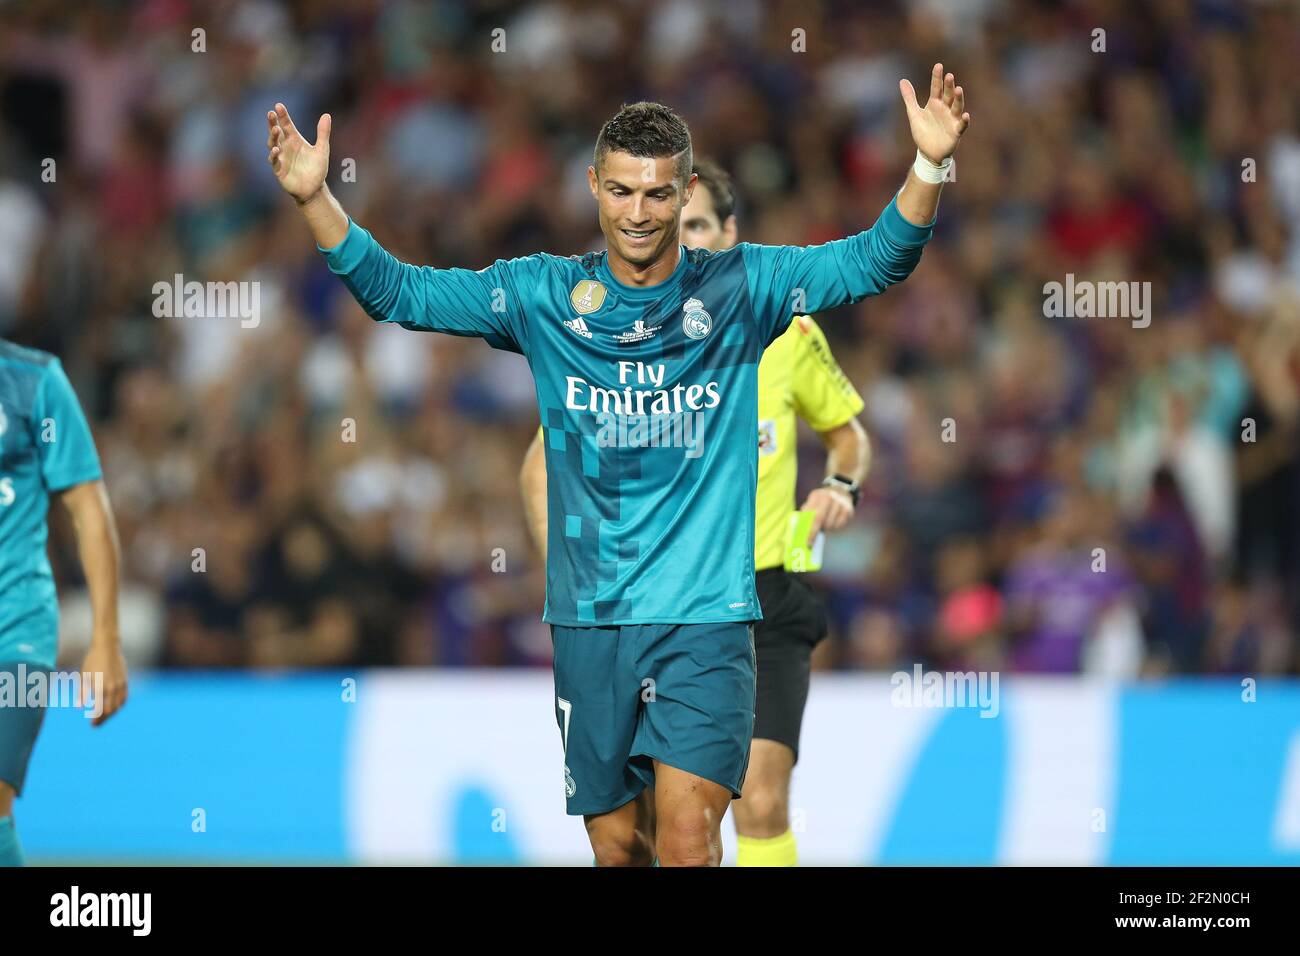 Ronaldo Real Madrid reacts as receives a red card during the Spanish Super Cup football match between FC Barcelona and Real on August 13, 2017 at Camp Nou stadium